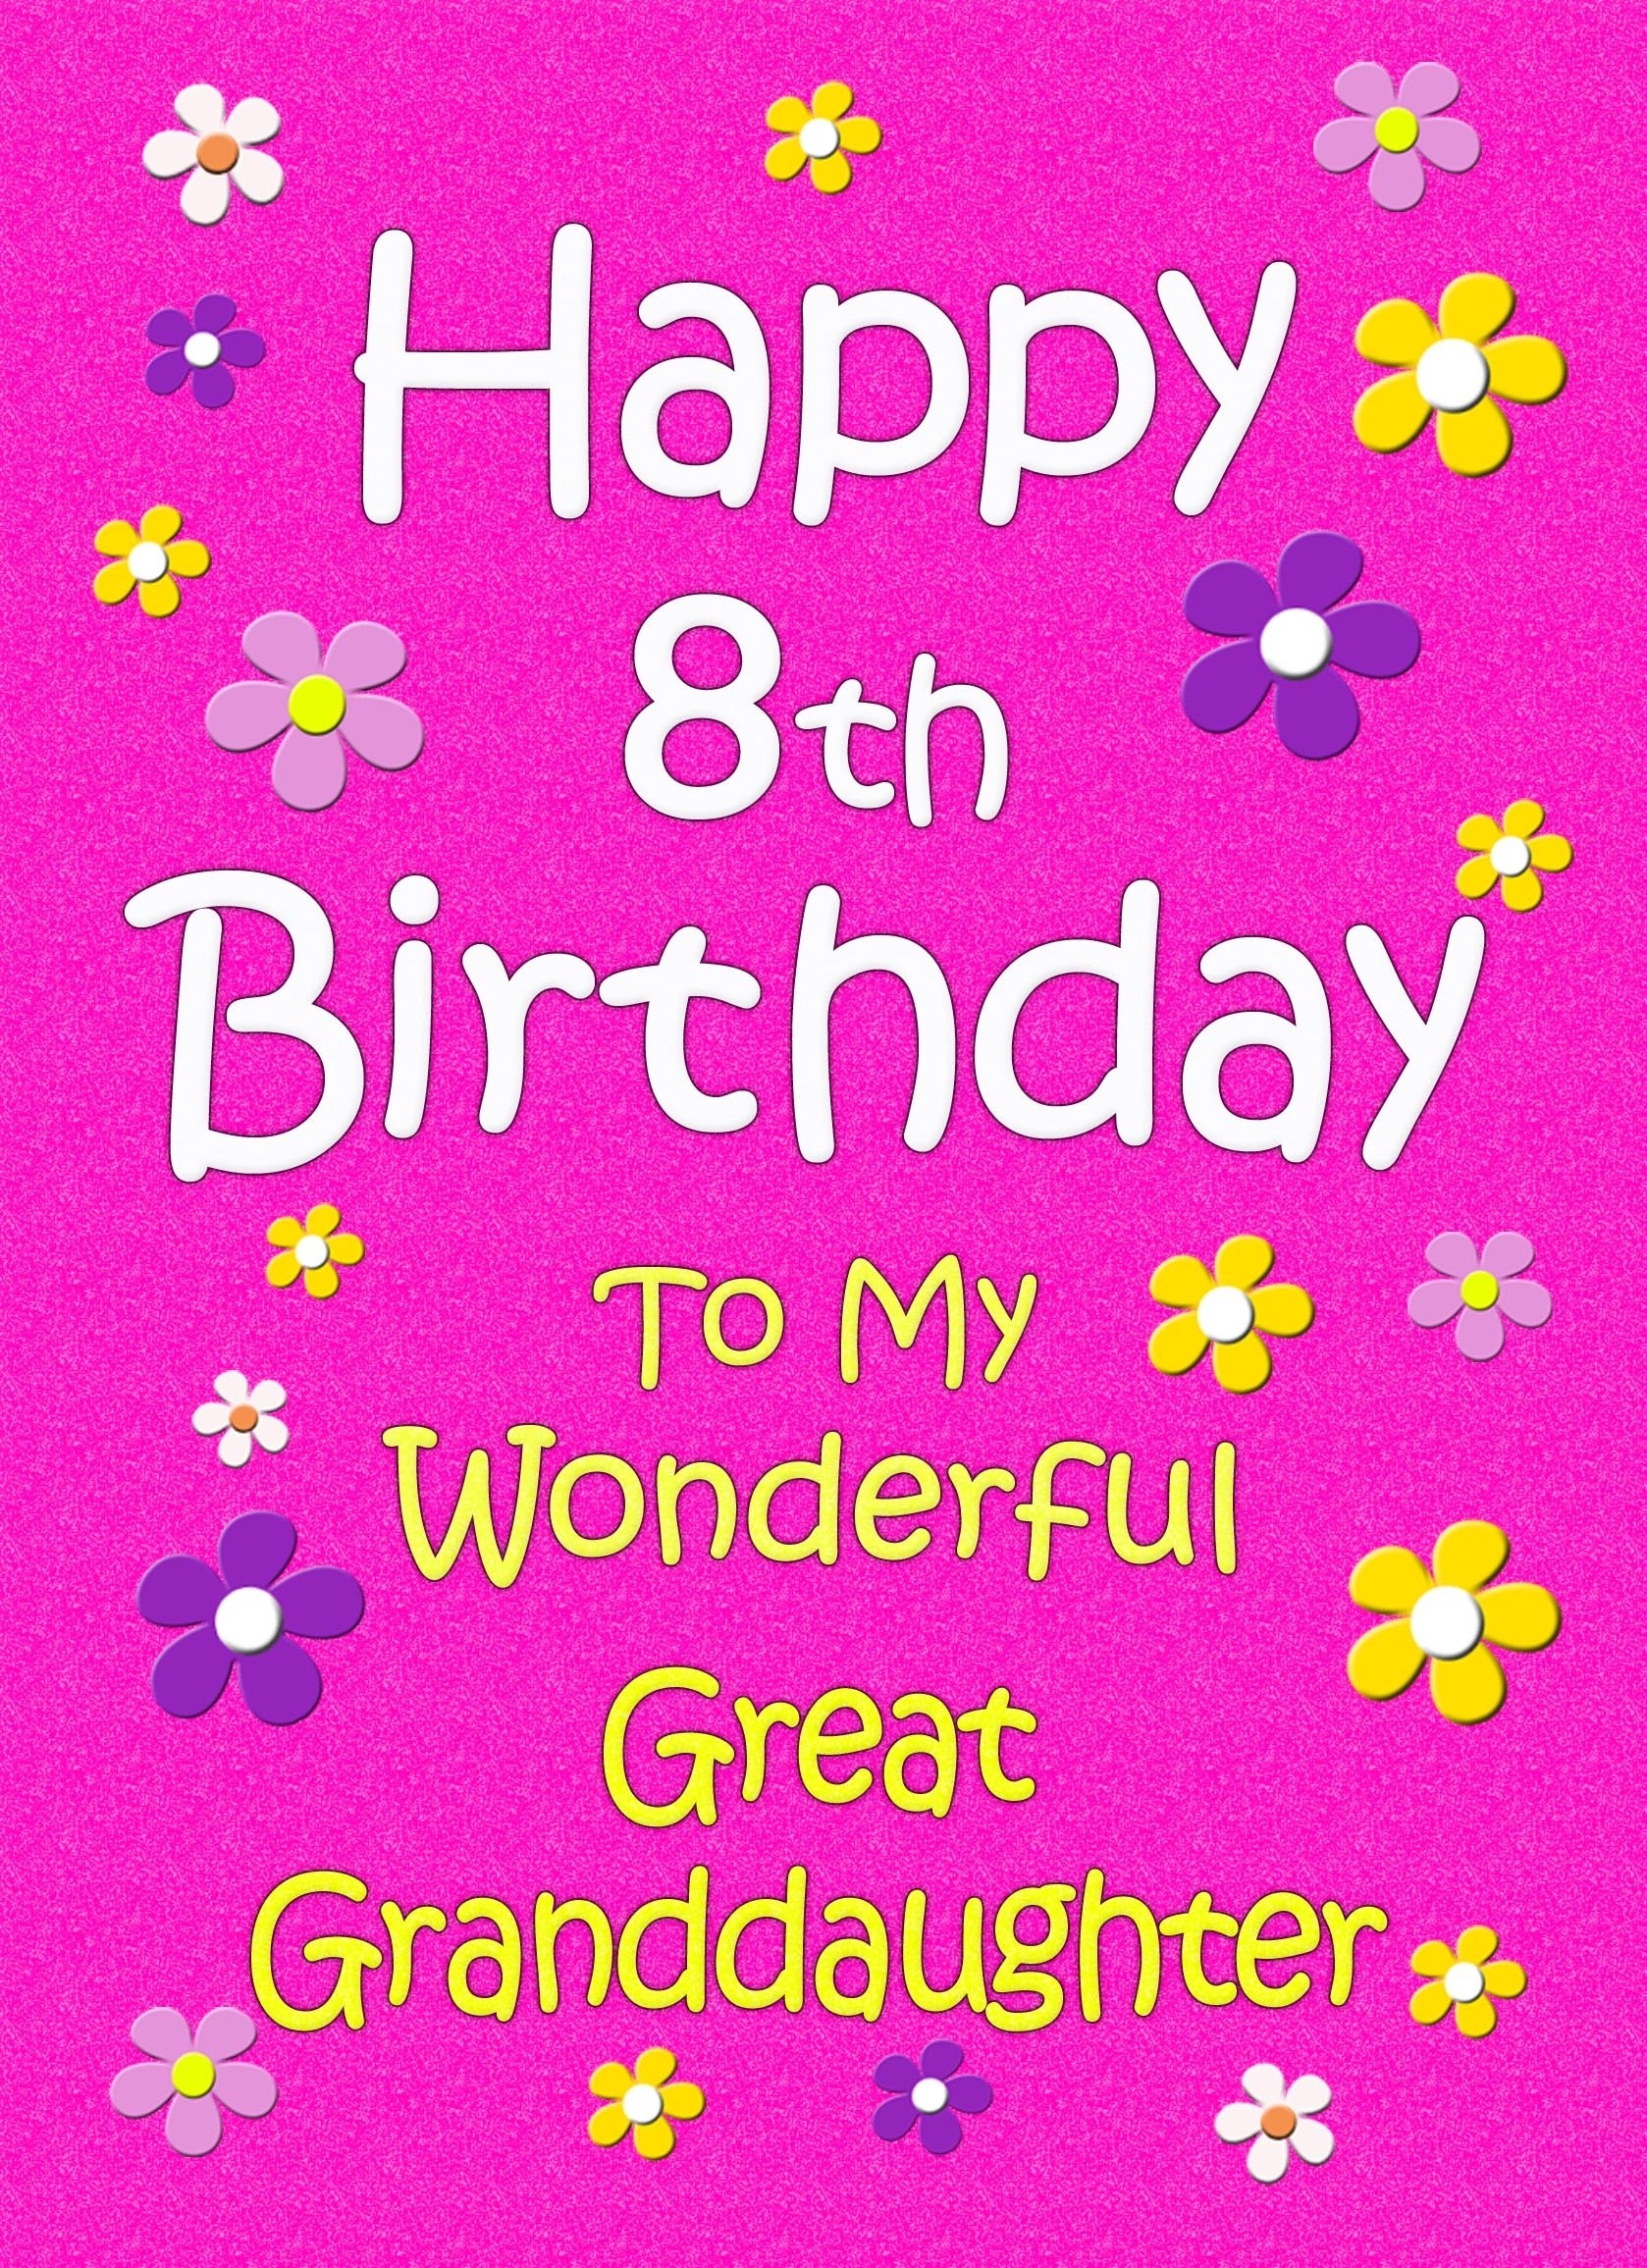 Great Granddaughter 8th Birthday Card (Pink)